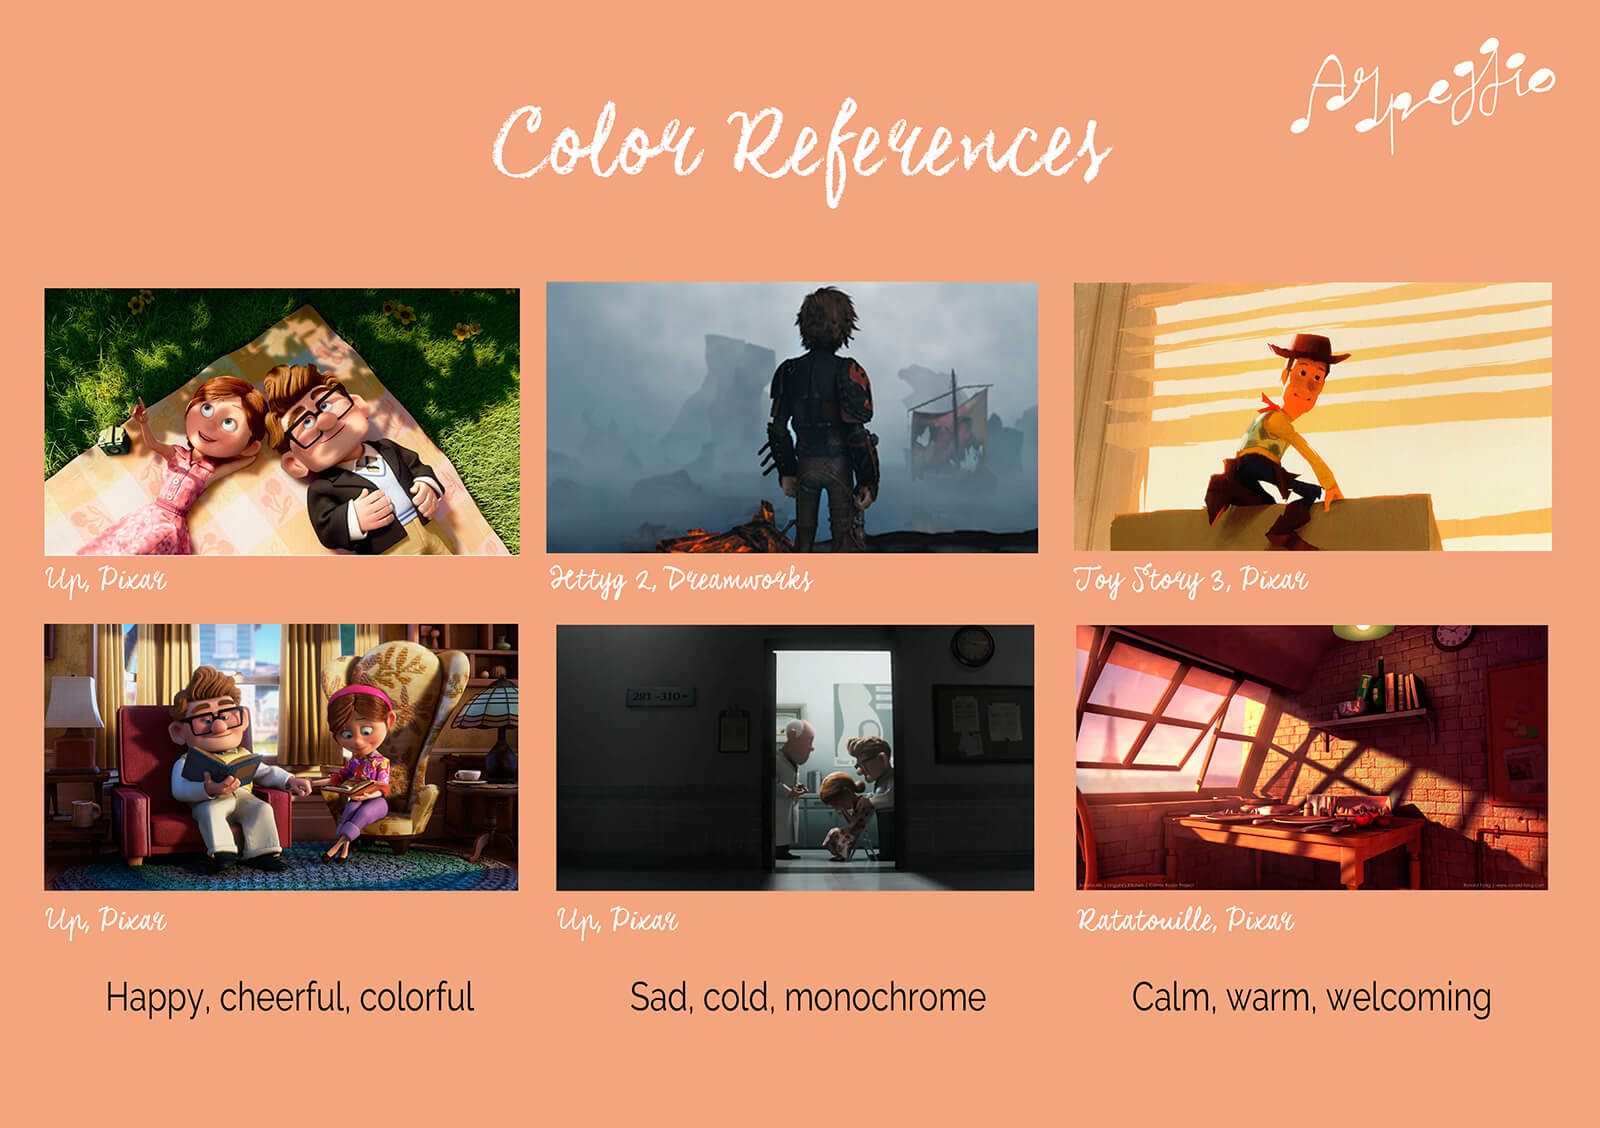 Color references for the film Arpeggio, including images from Up, Toy Story, Ratatouille, and How to Train Your Dragon